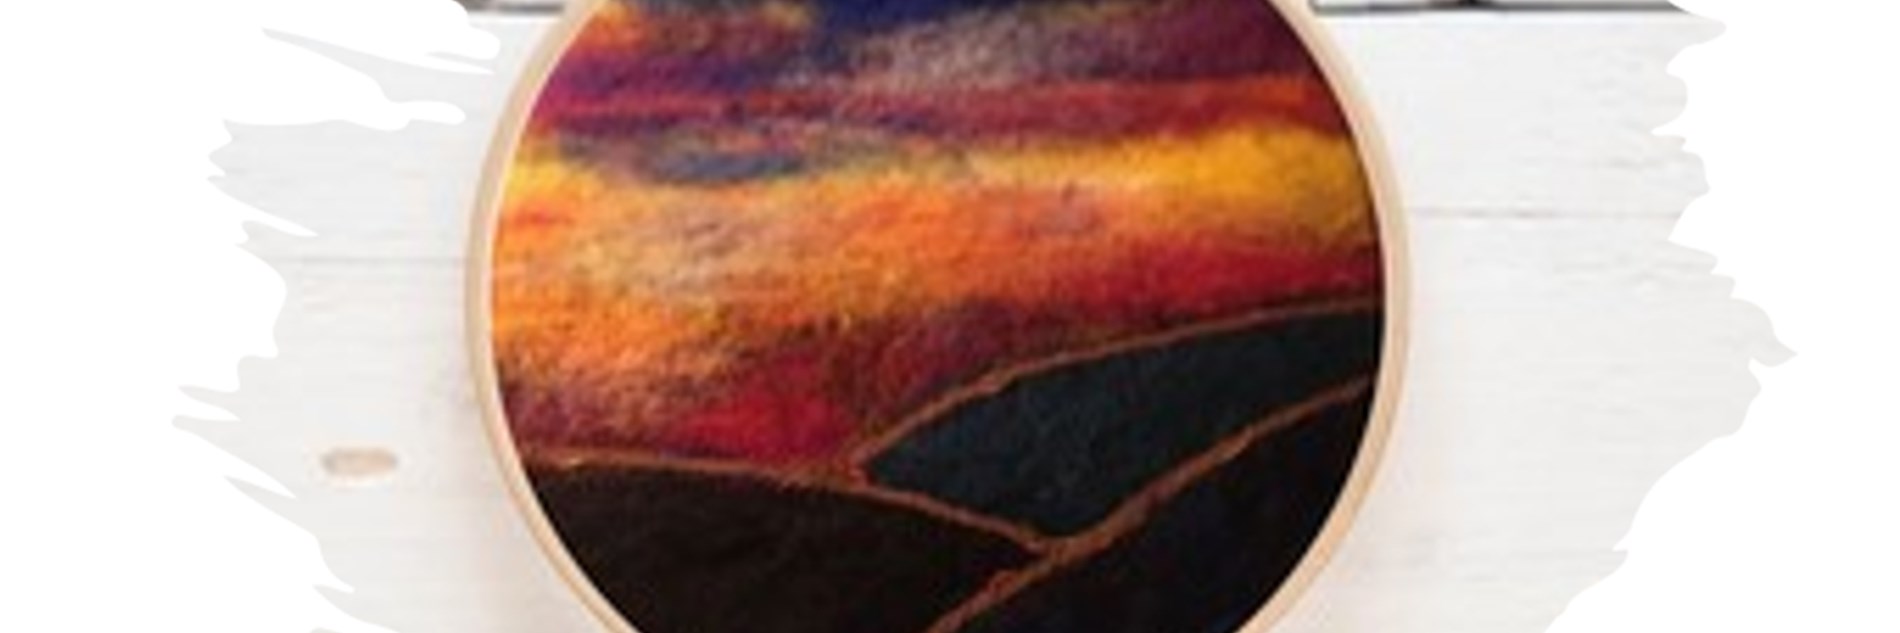 Photograph of a needle-felted landscape in an embroidery hoop. The image features dark coloured hills with a red, orange and dark blue sky.